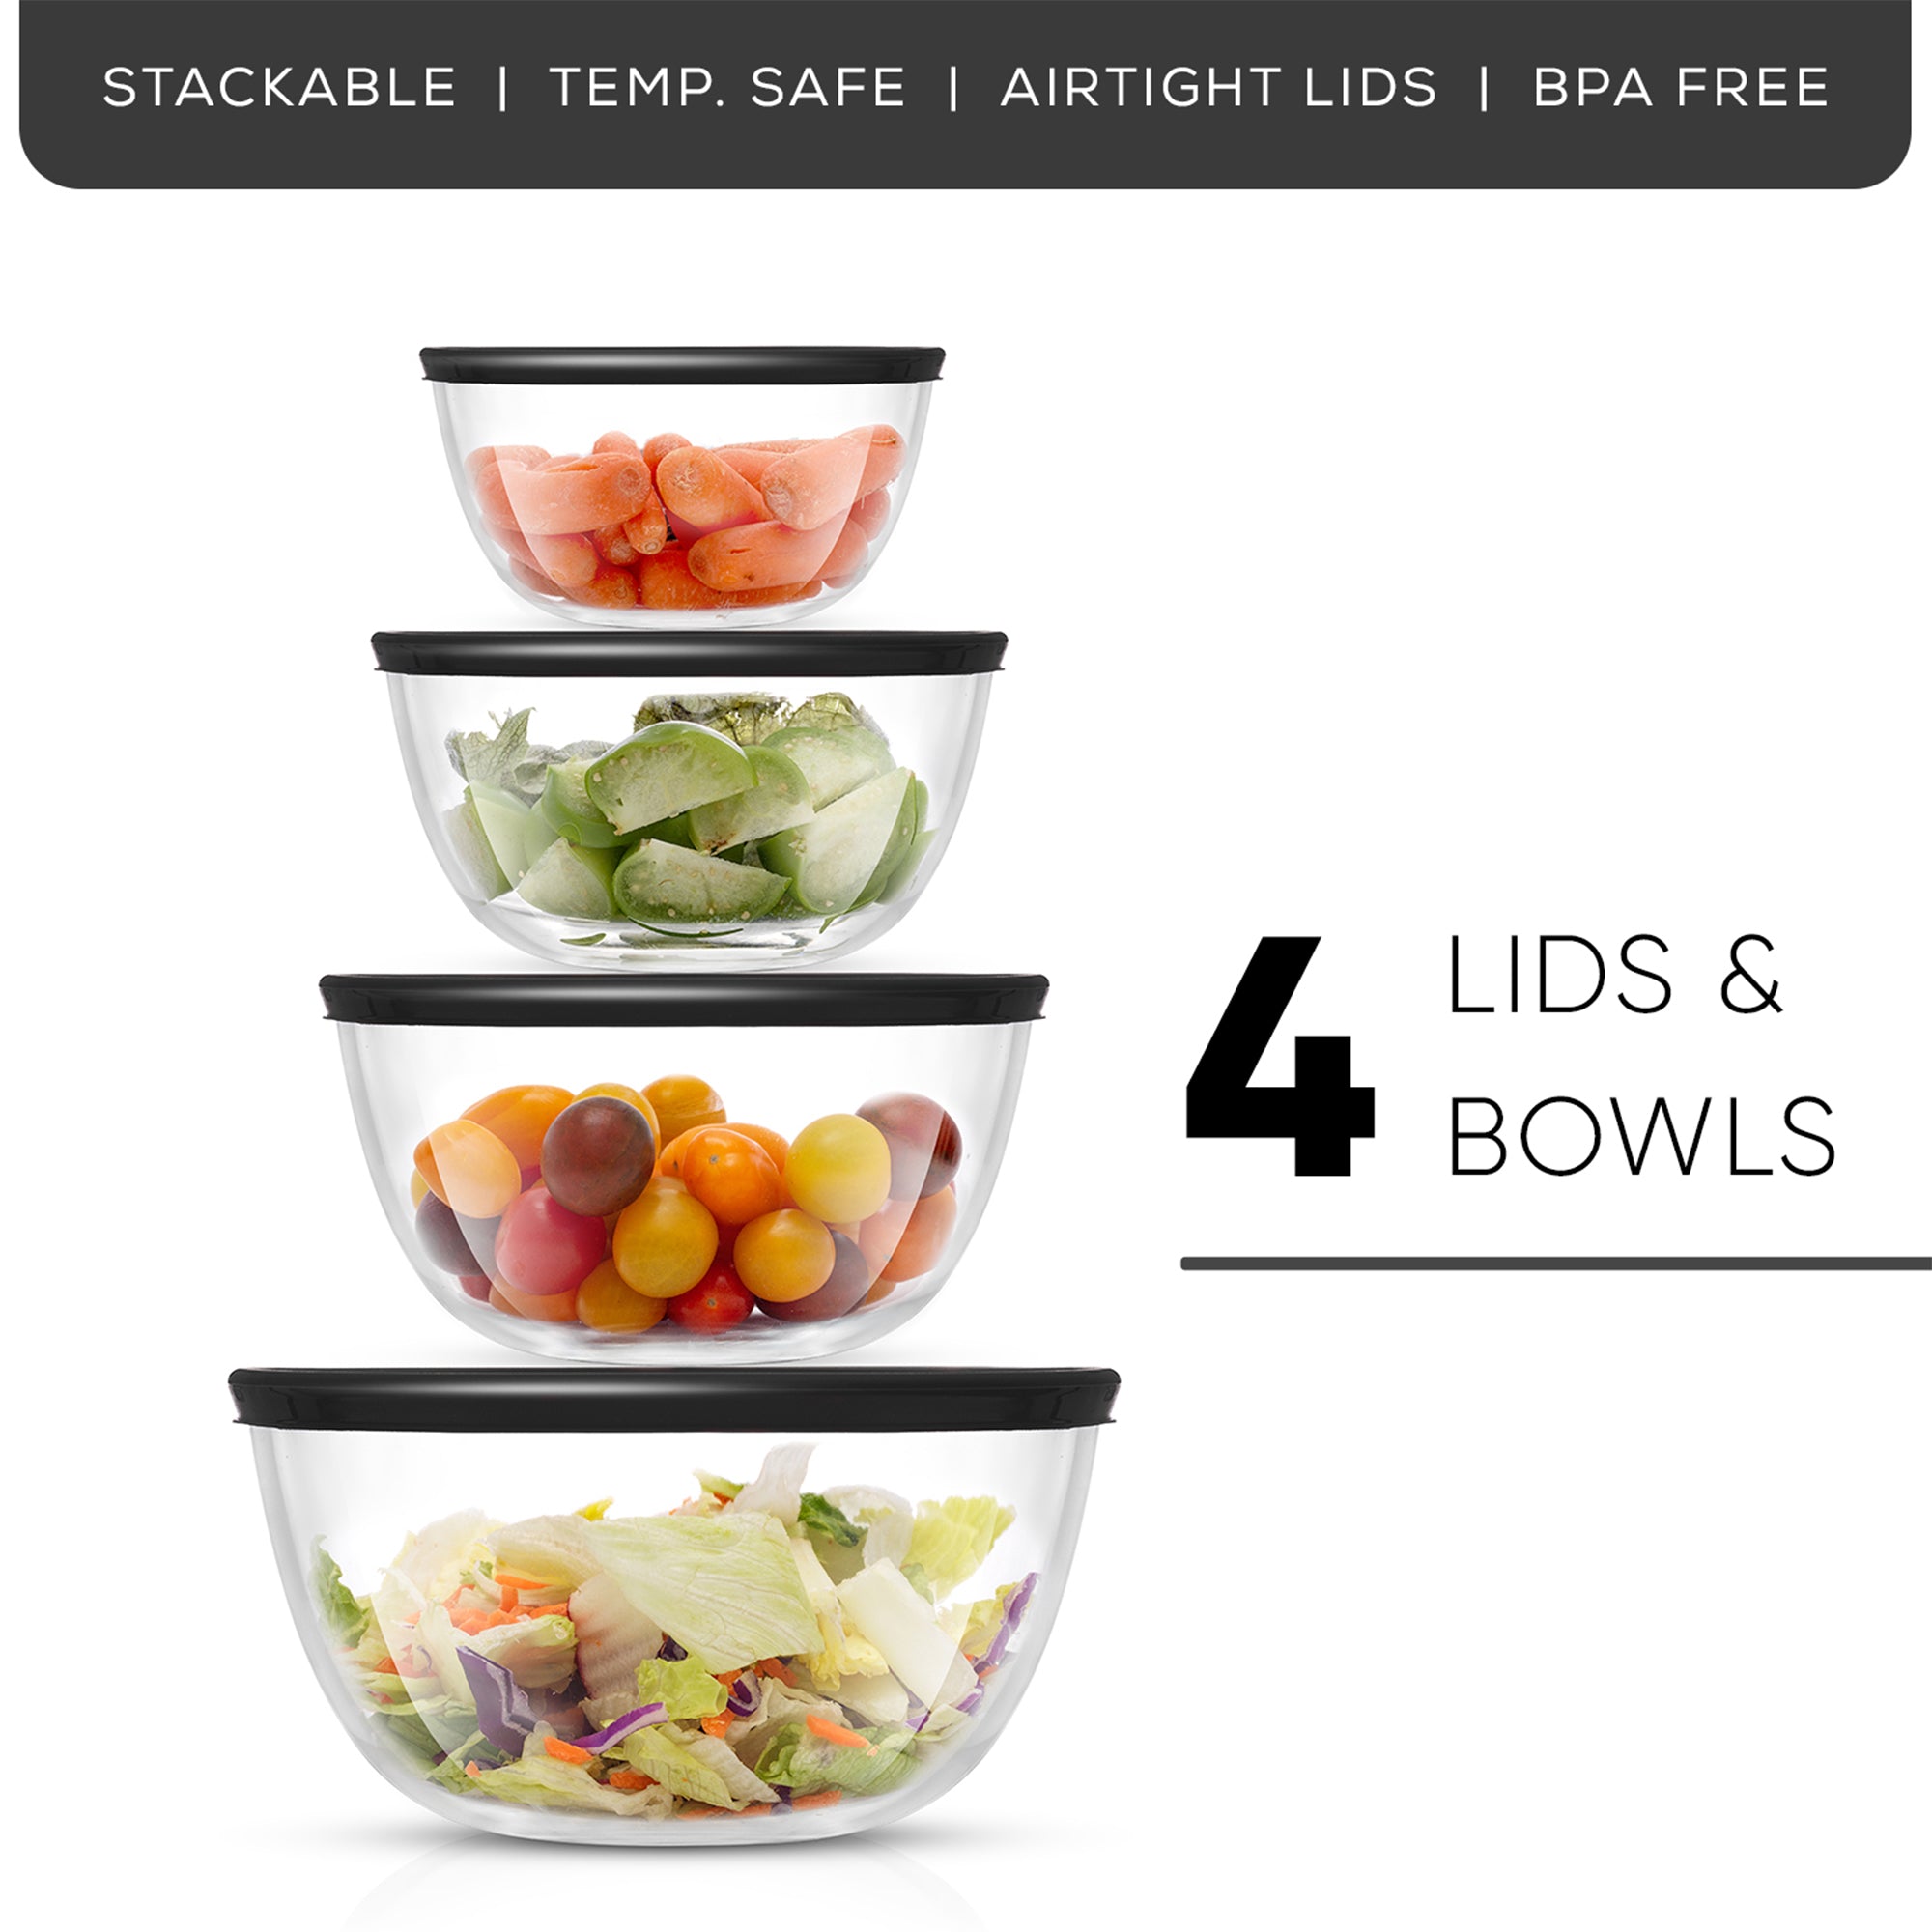 JoyJolt 4 Large Glass Mixing Bowls With Lids - a set of 4 spacious glass bowls with lids for convenient food preparation and storage.